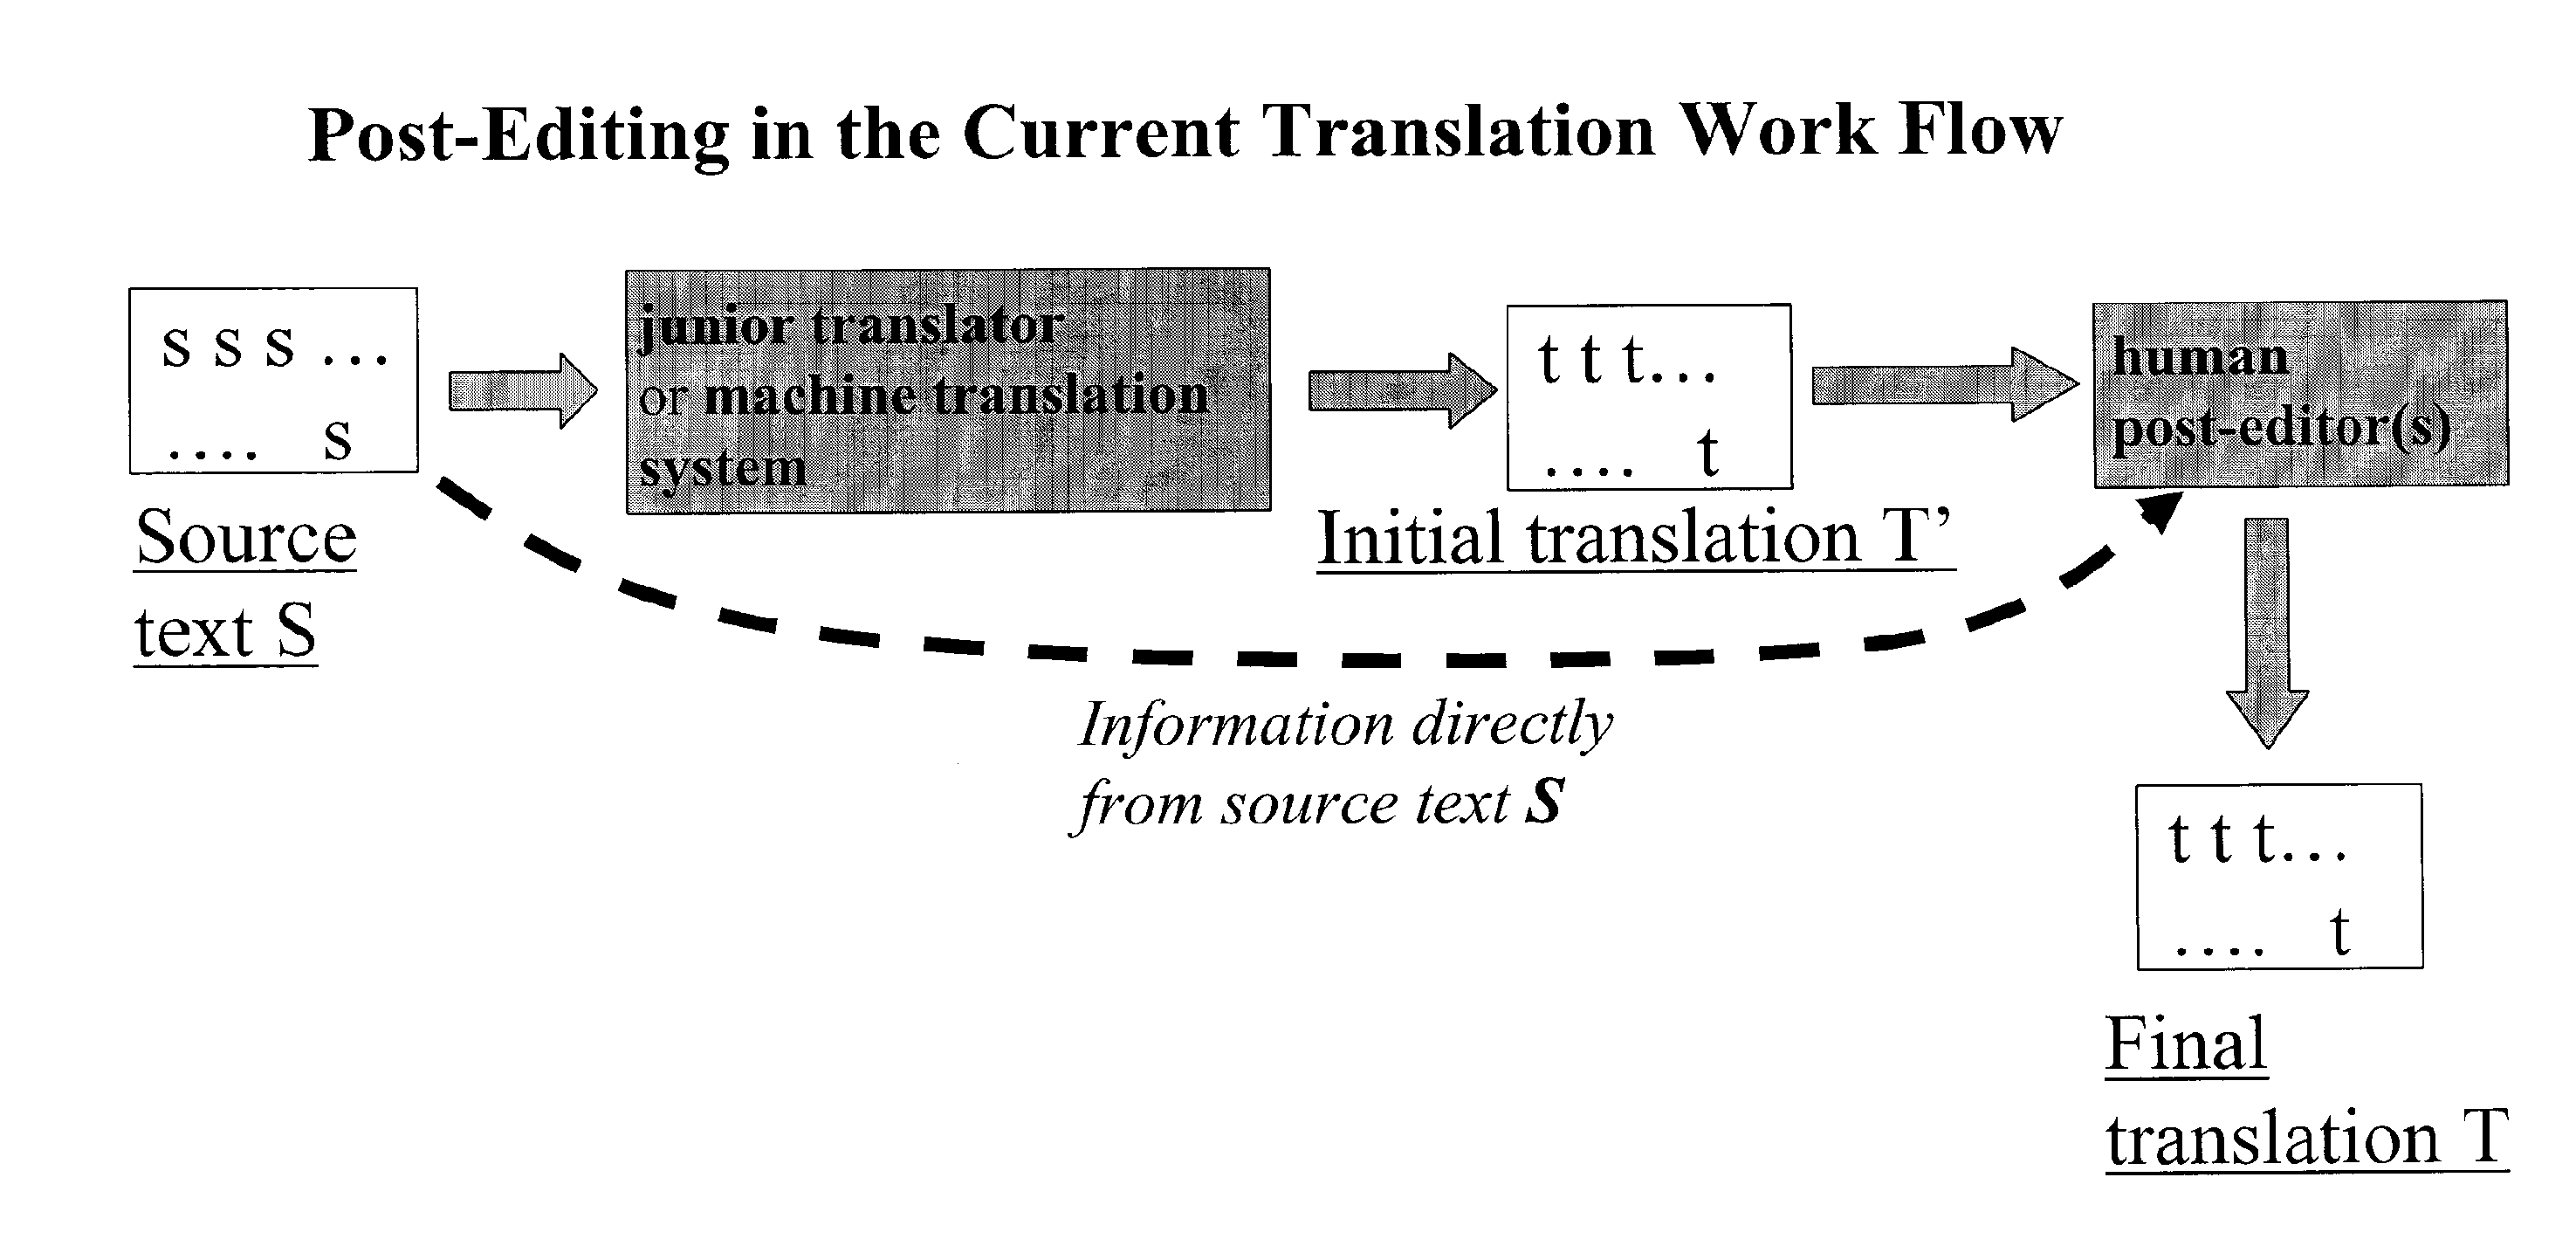 Means and method for automatic post-editing of translations